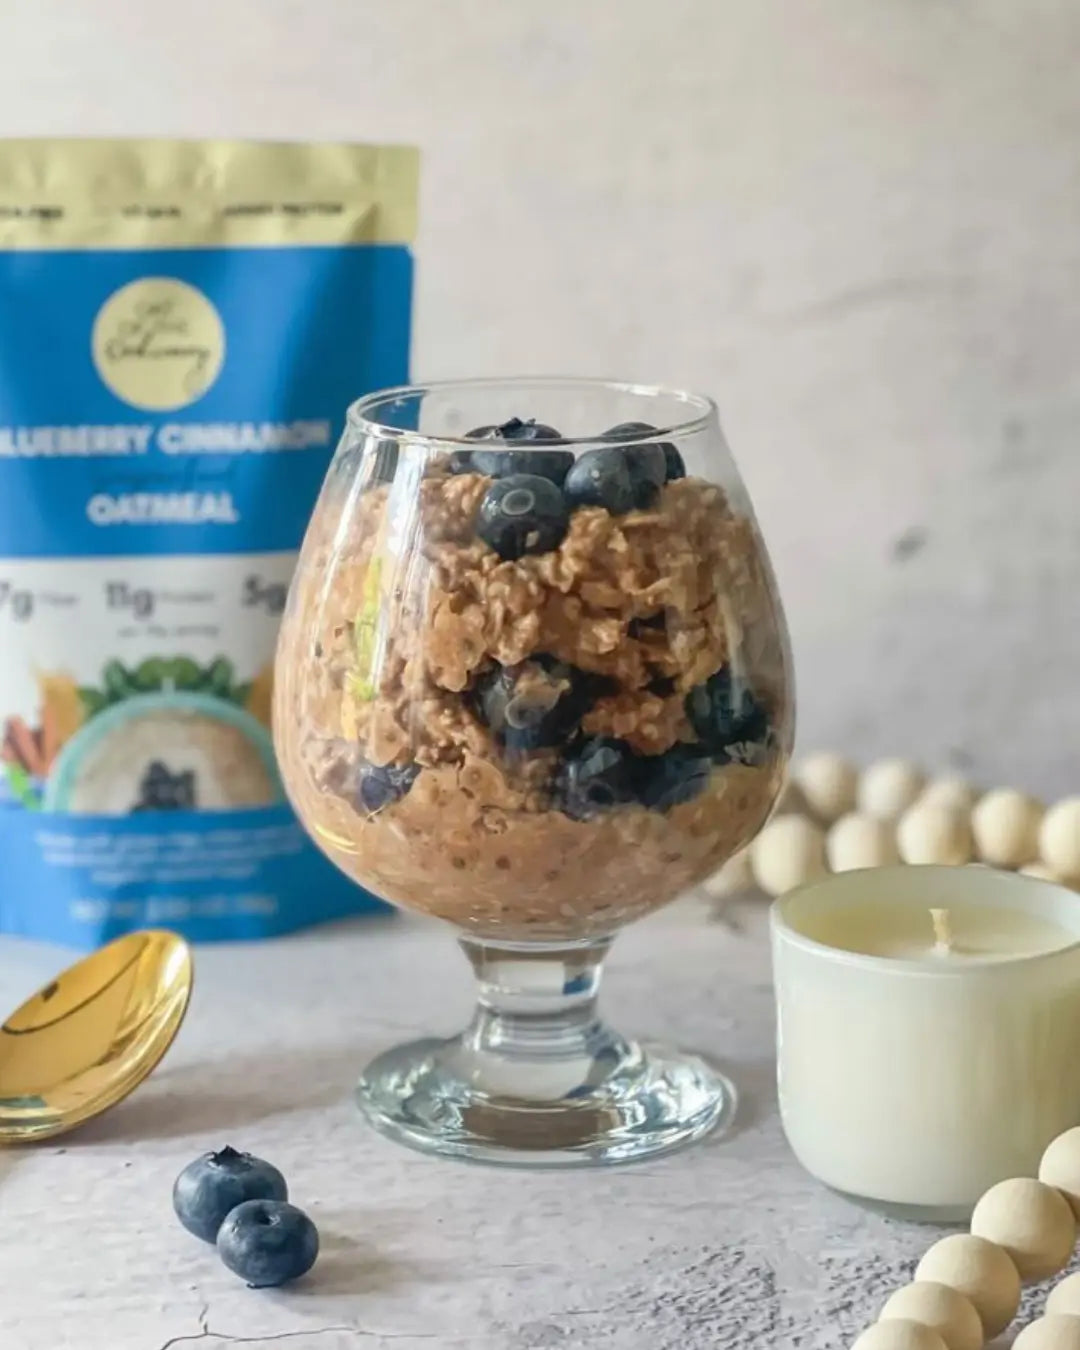 Blueberry Cinnamon high protein, low sugar oatmeal that is gluten-free and vegan.